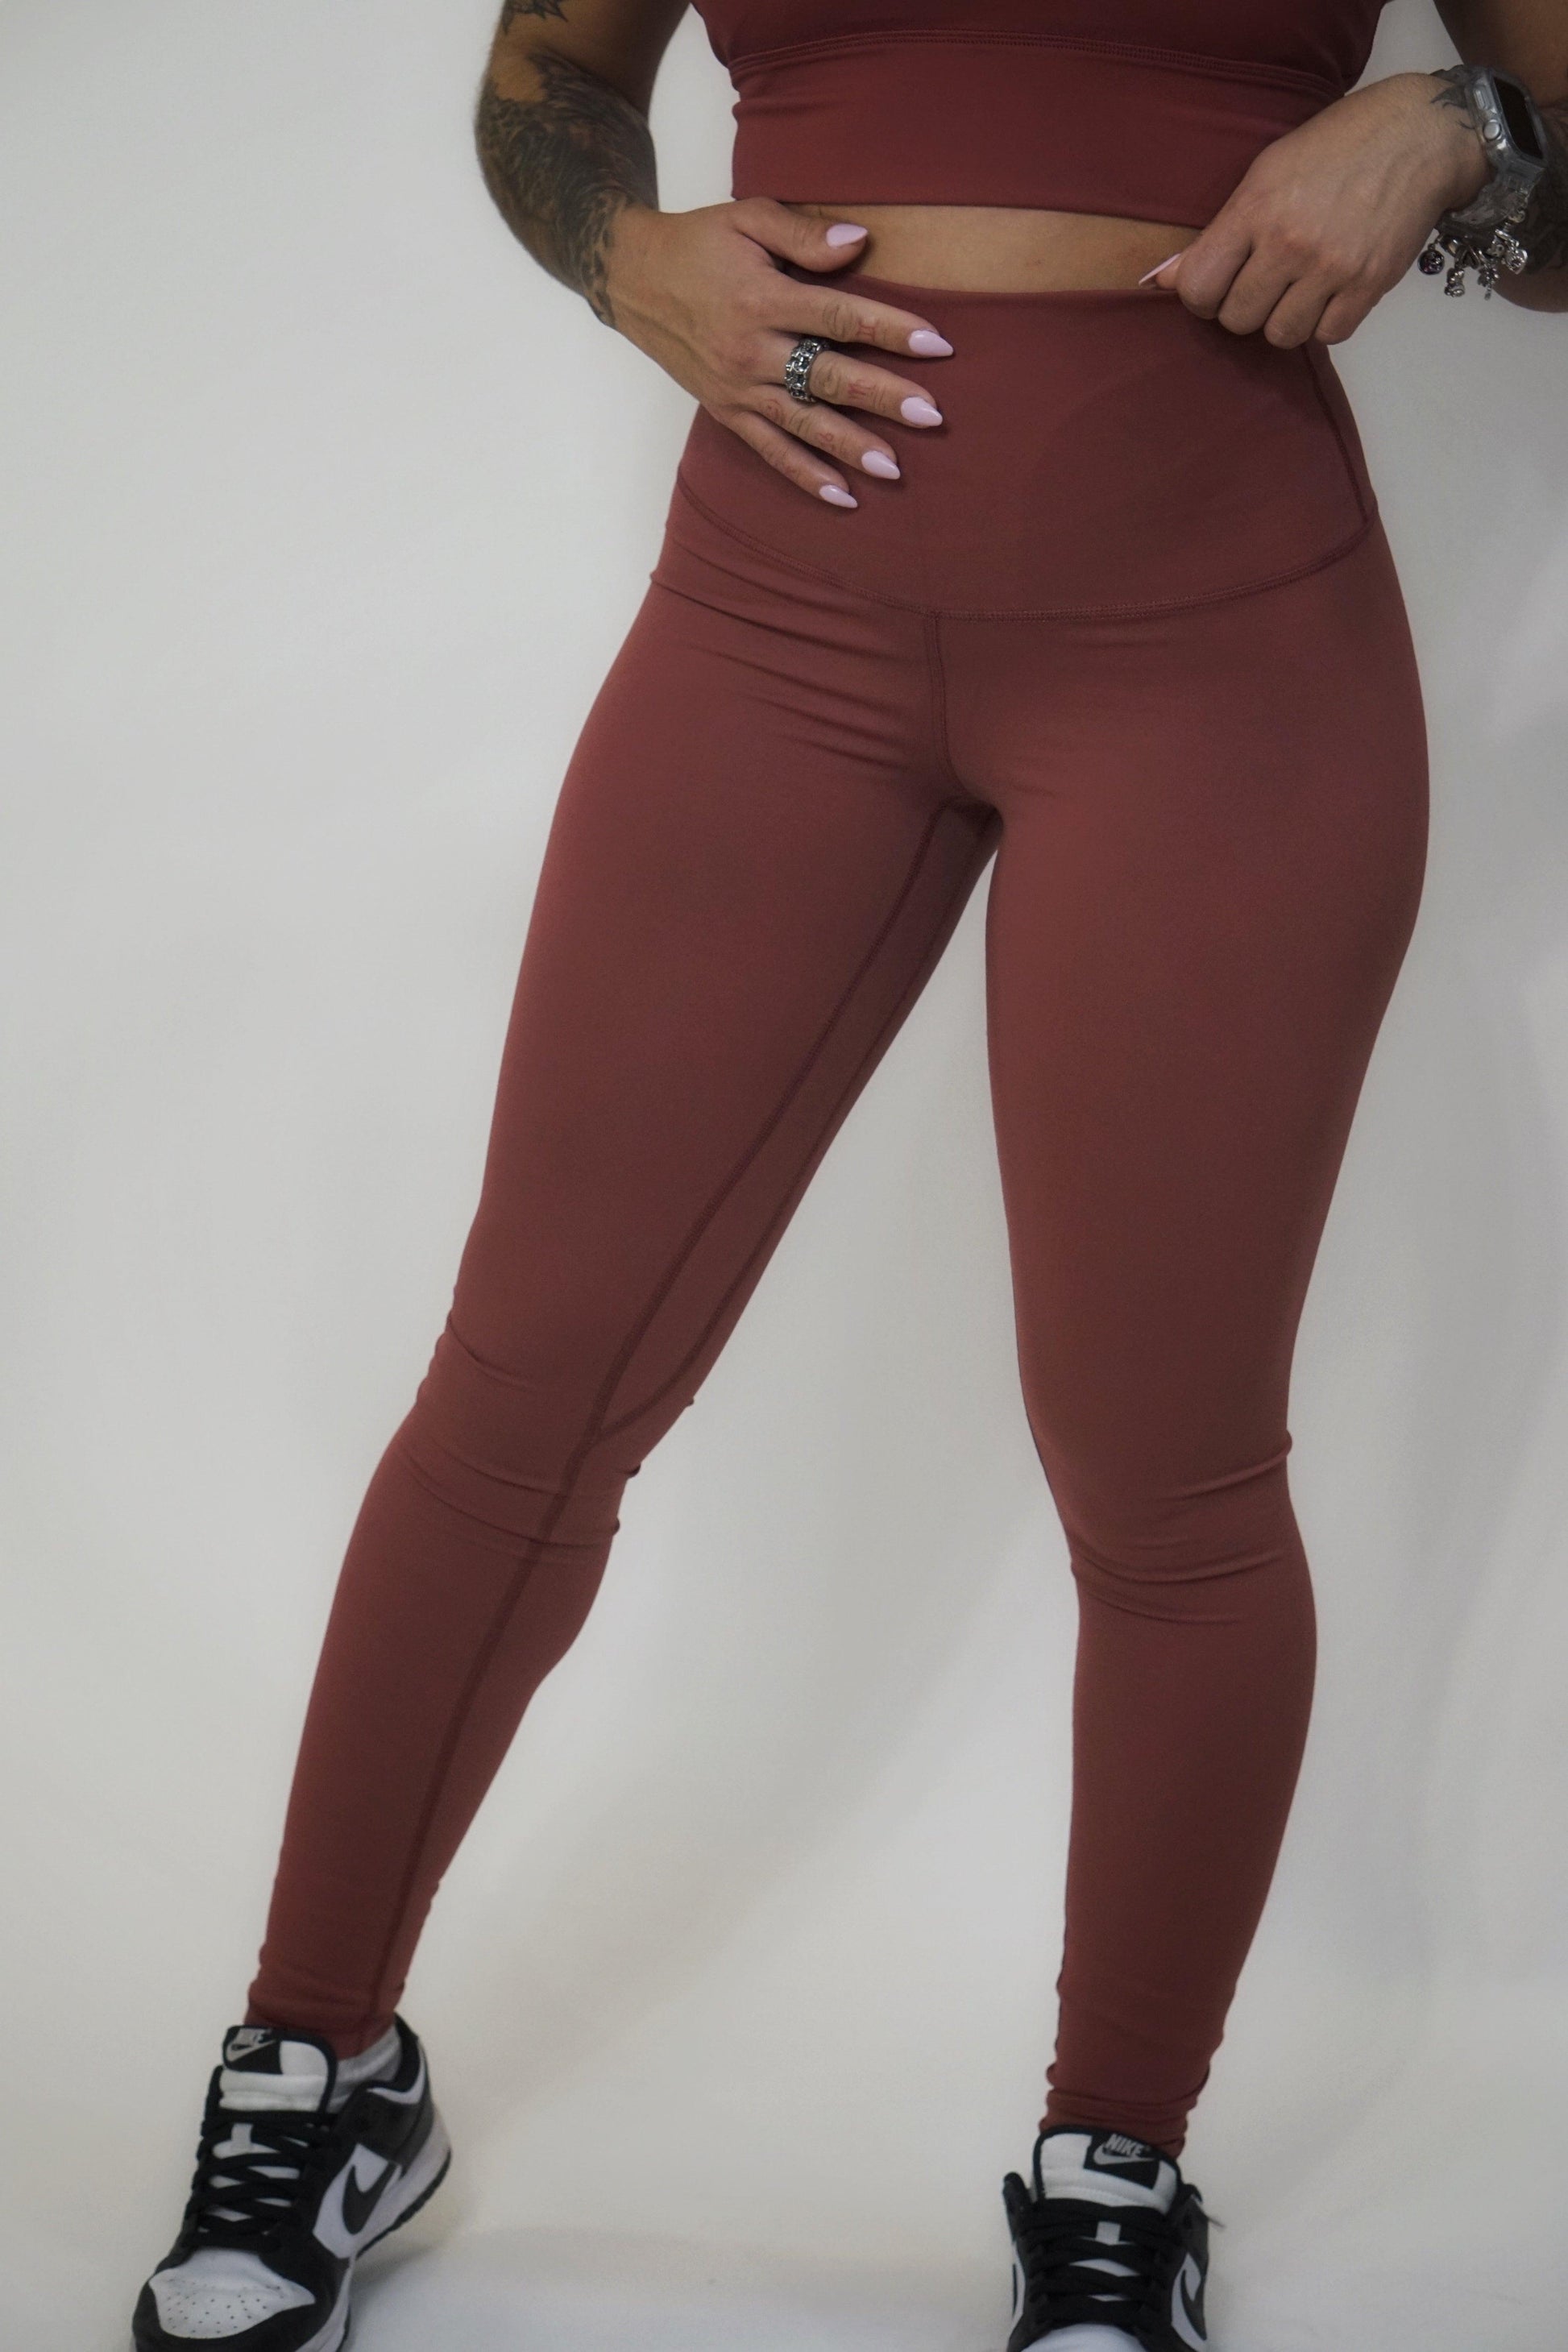 Supremacy Rouge Leggings - The Omega Fitness Workout Apparel